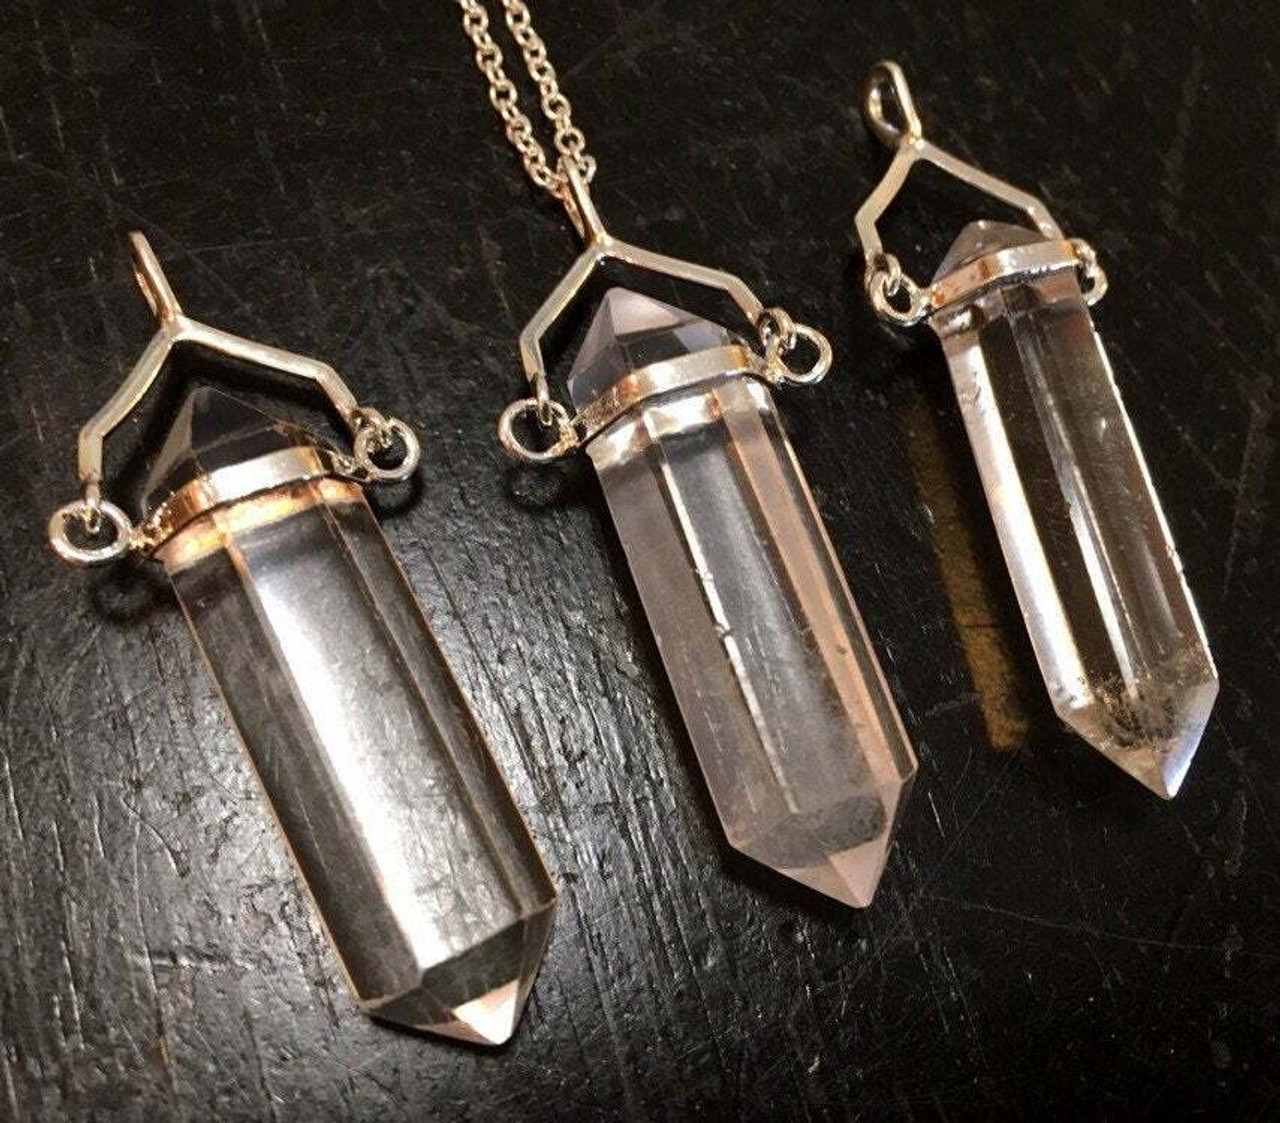 Clear Quartz Double Point Healing Crystal Pendant with Silver Plated Bale on a Silver Chain 44cm long